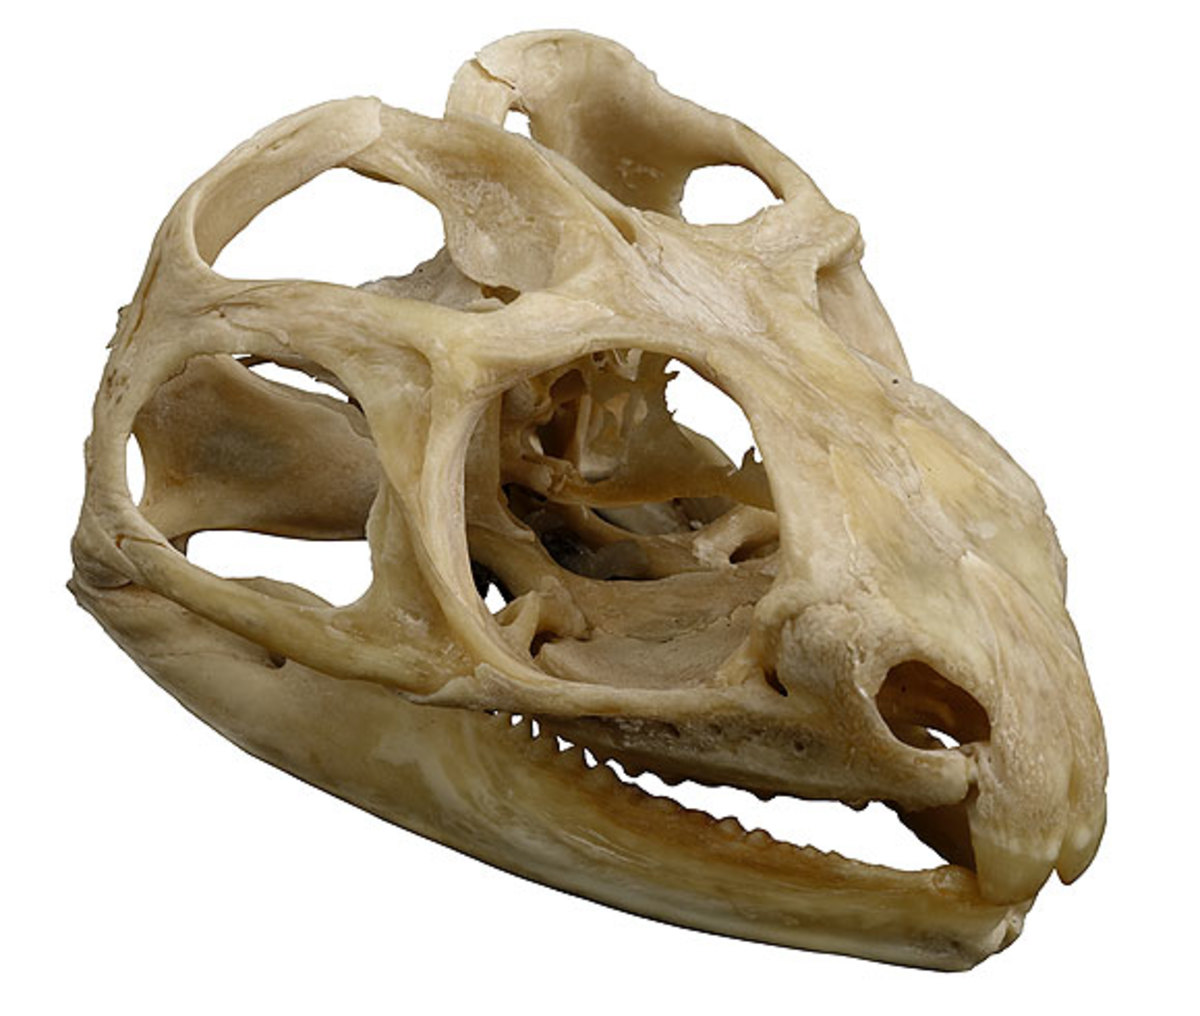 Tuatara skull with a collection of fenestrae.